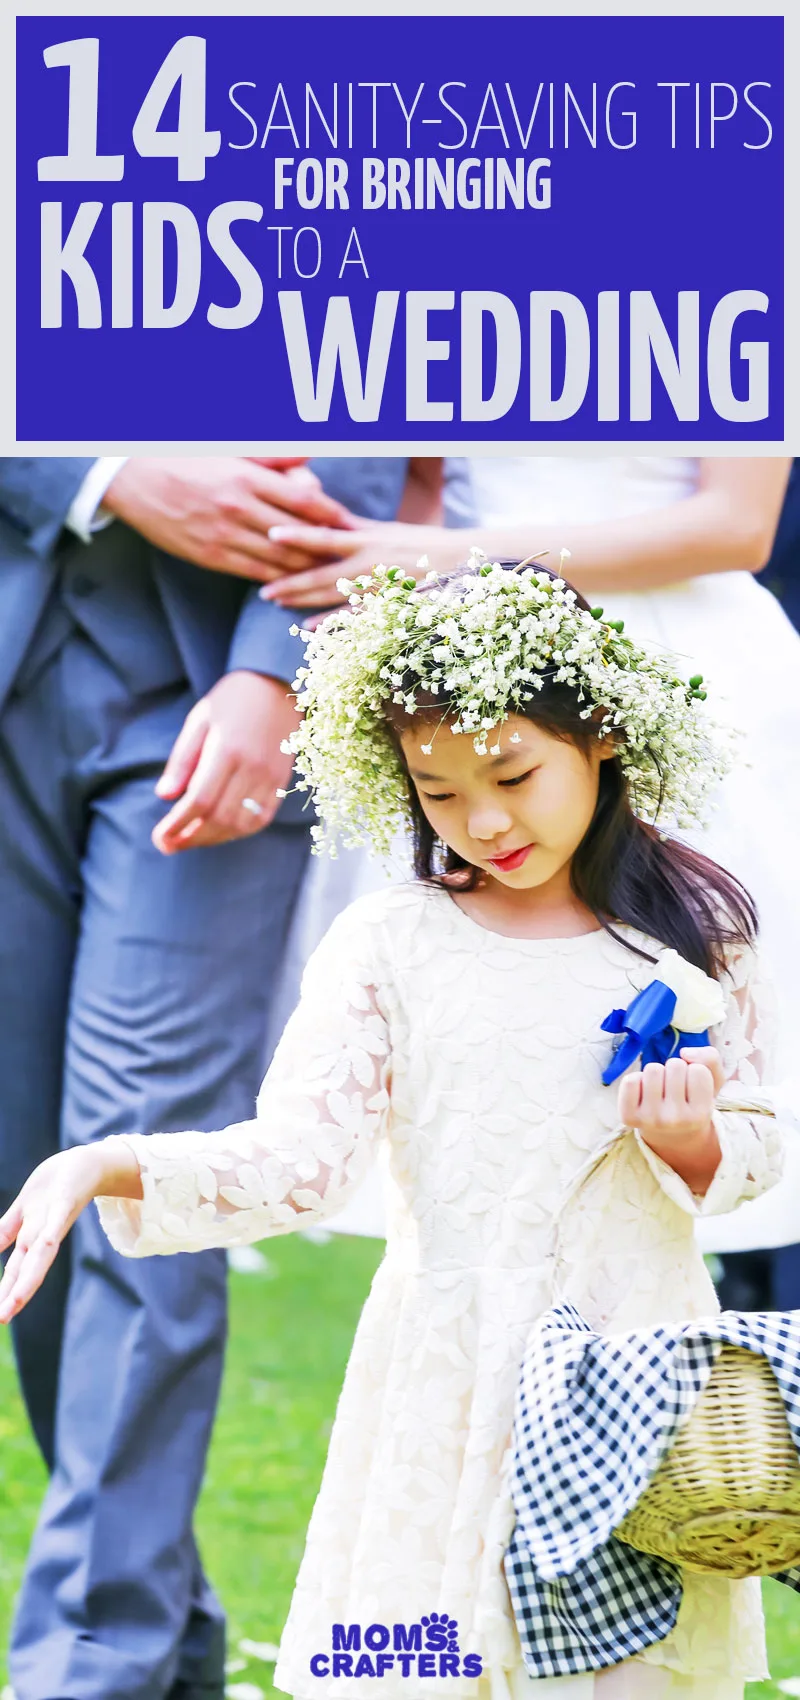 Click for 14 tips you need to read before bringing kids to a wedding! These sanity-saving tips and hacks for moms to deal with kids at a wedding will help you enjoy it so much more -w ith ideas for what to put in your diaper bag, activities for kids to do at a wedding, and other need-to-know parenting tips for handling toddlers and preschoolers at a family event. #weddings #parentingtips #kidsactivities